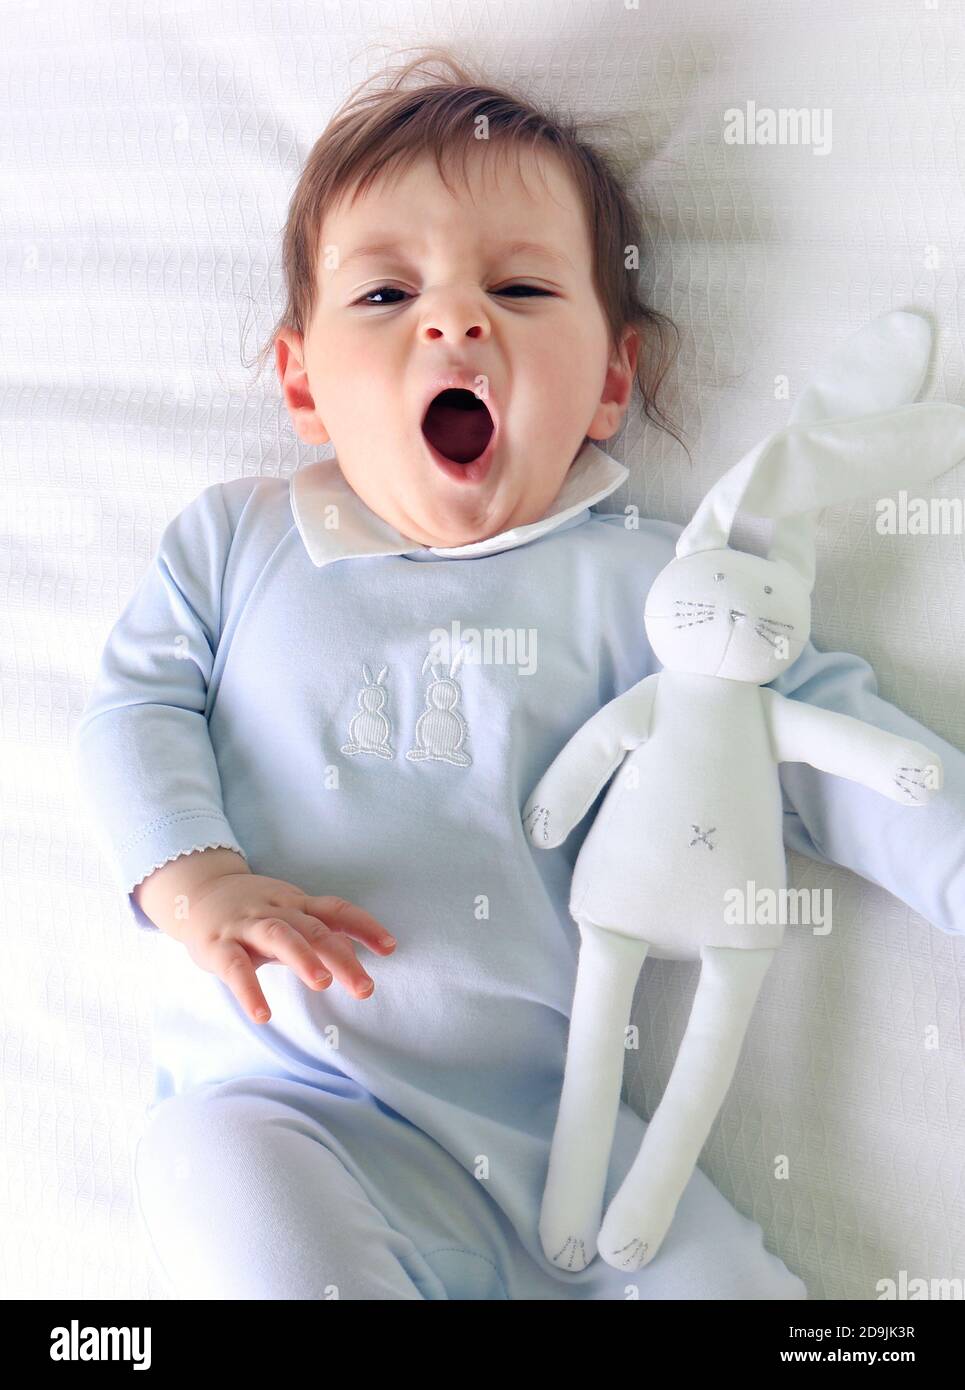 A yawning baby wearing blue and holding his bunny rabbit plush toy. Stock Photo